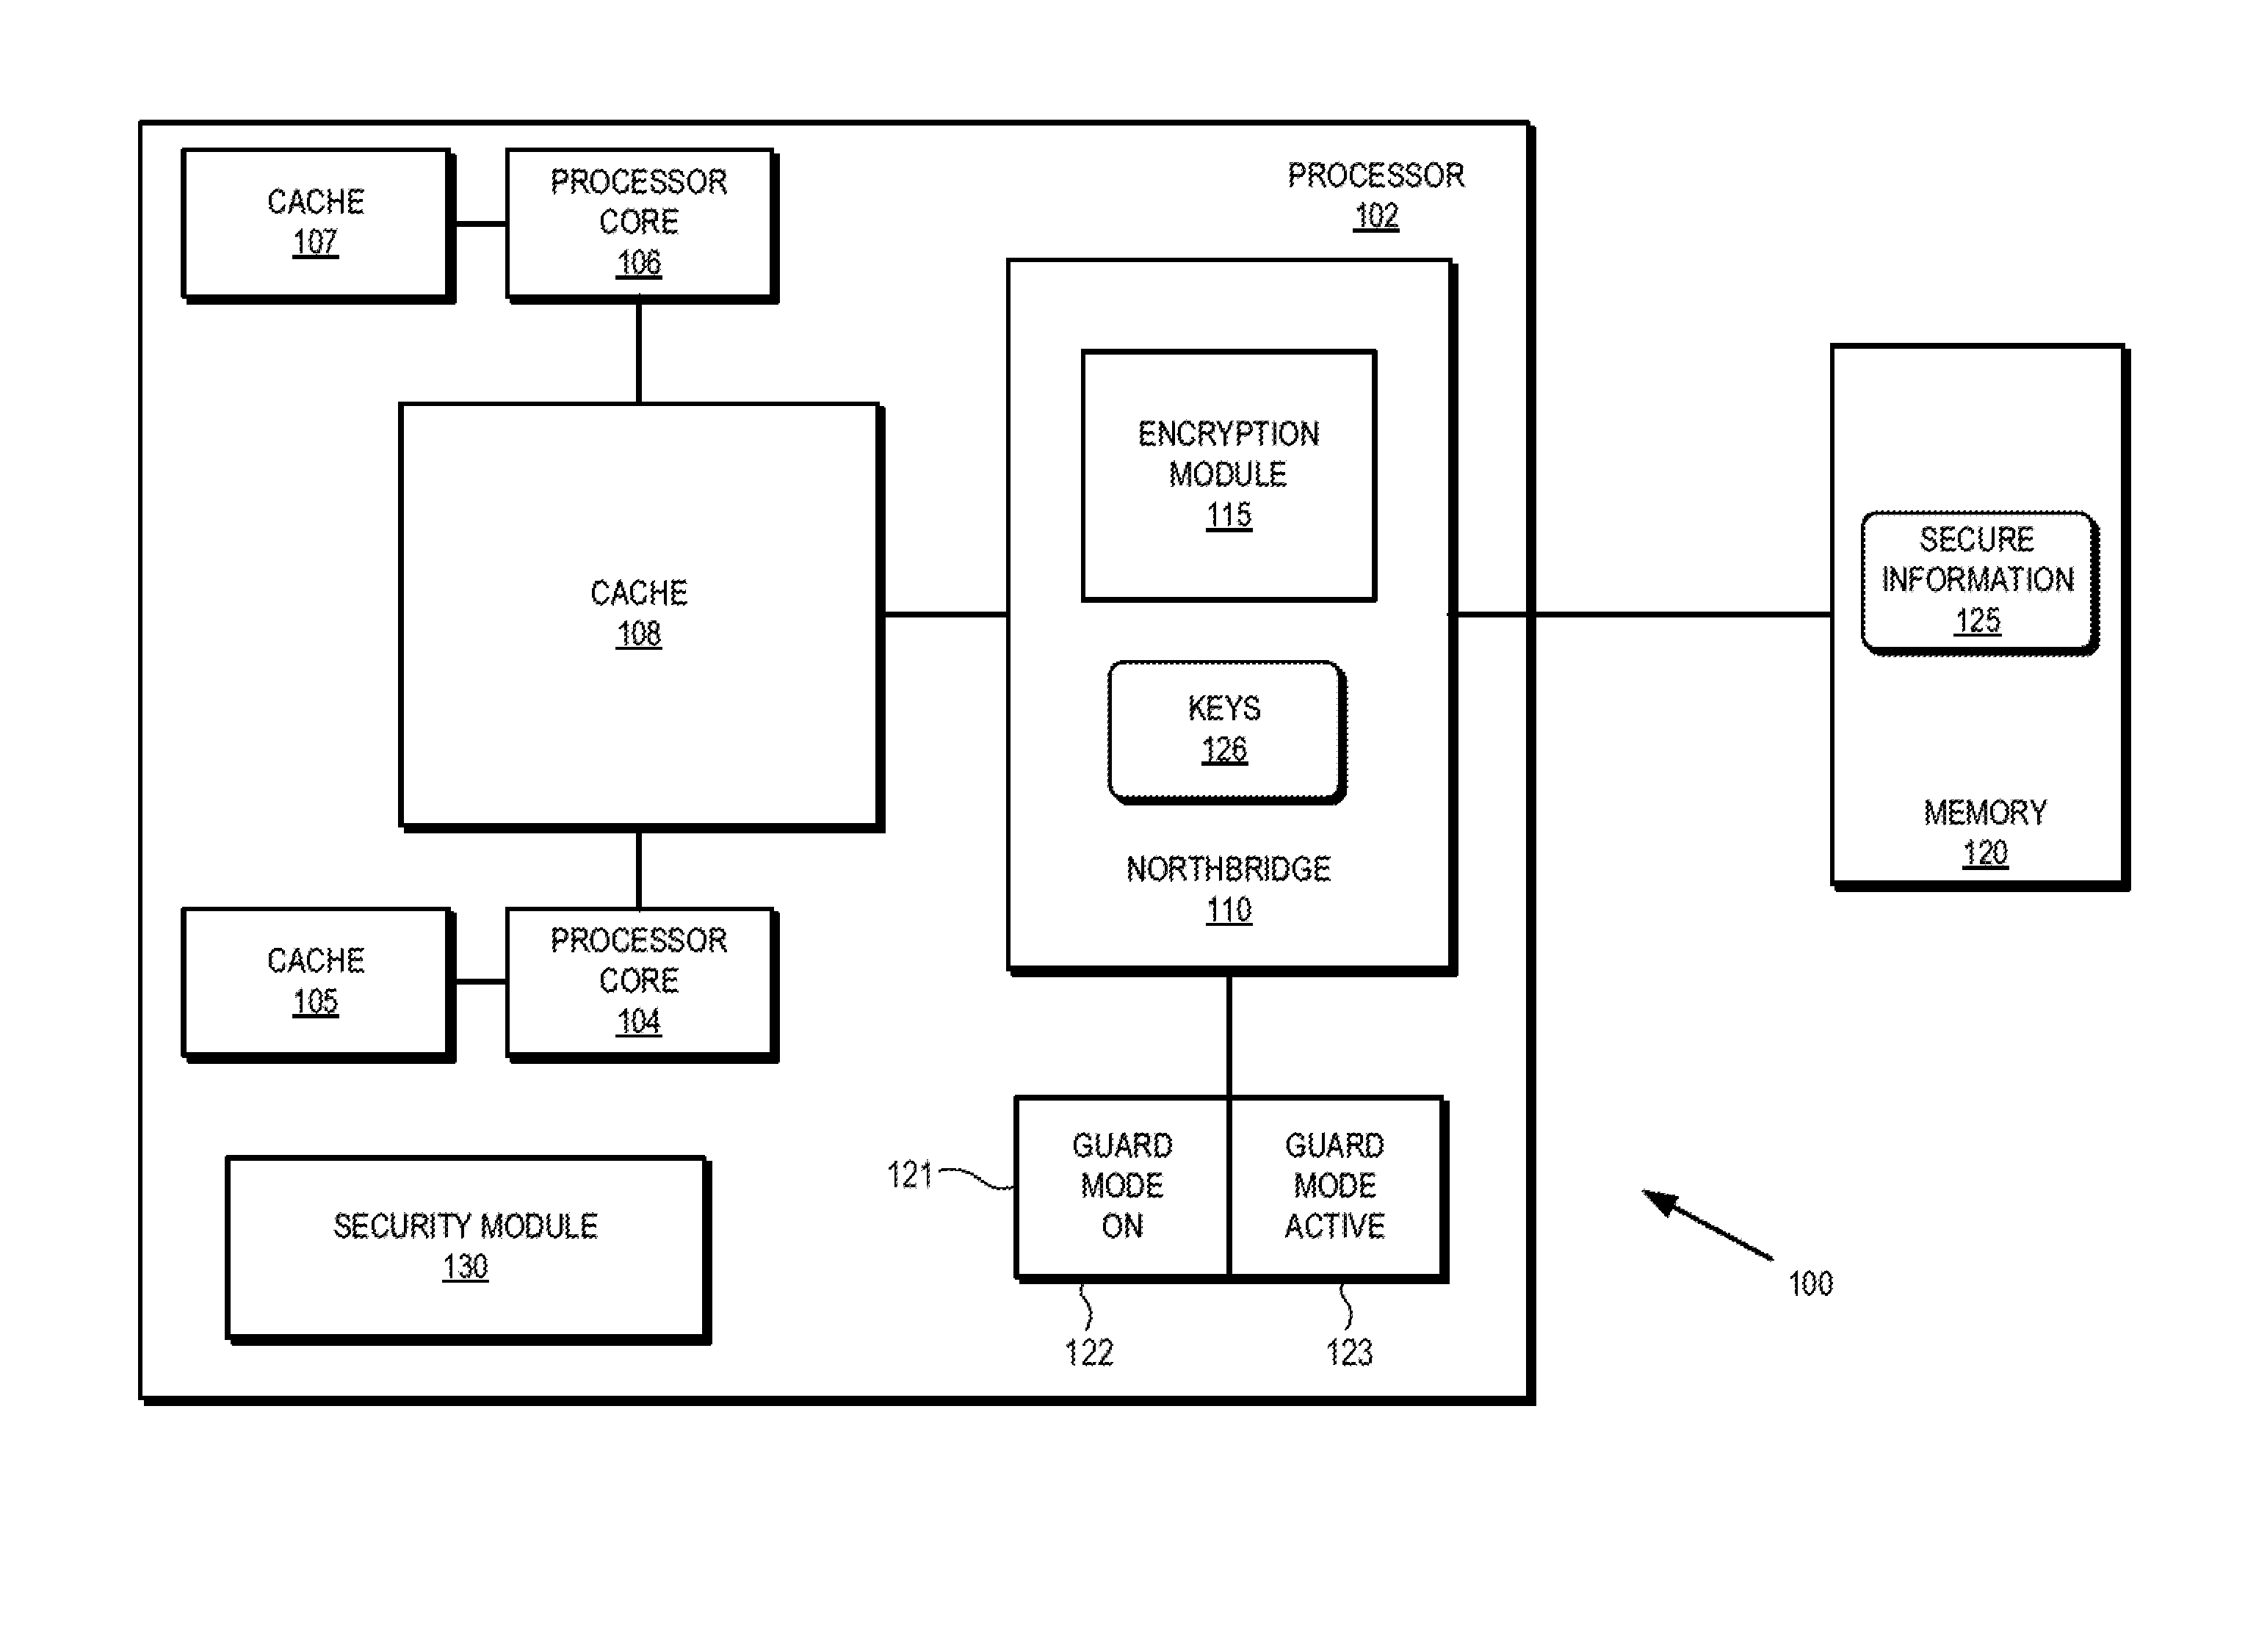 Cryptographic protection of information in a processing system